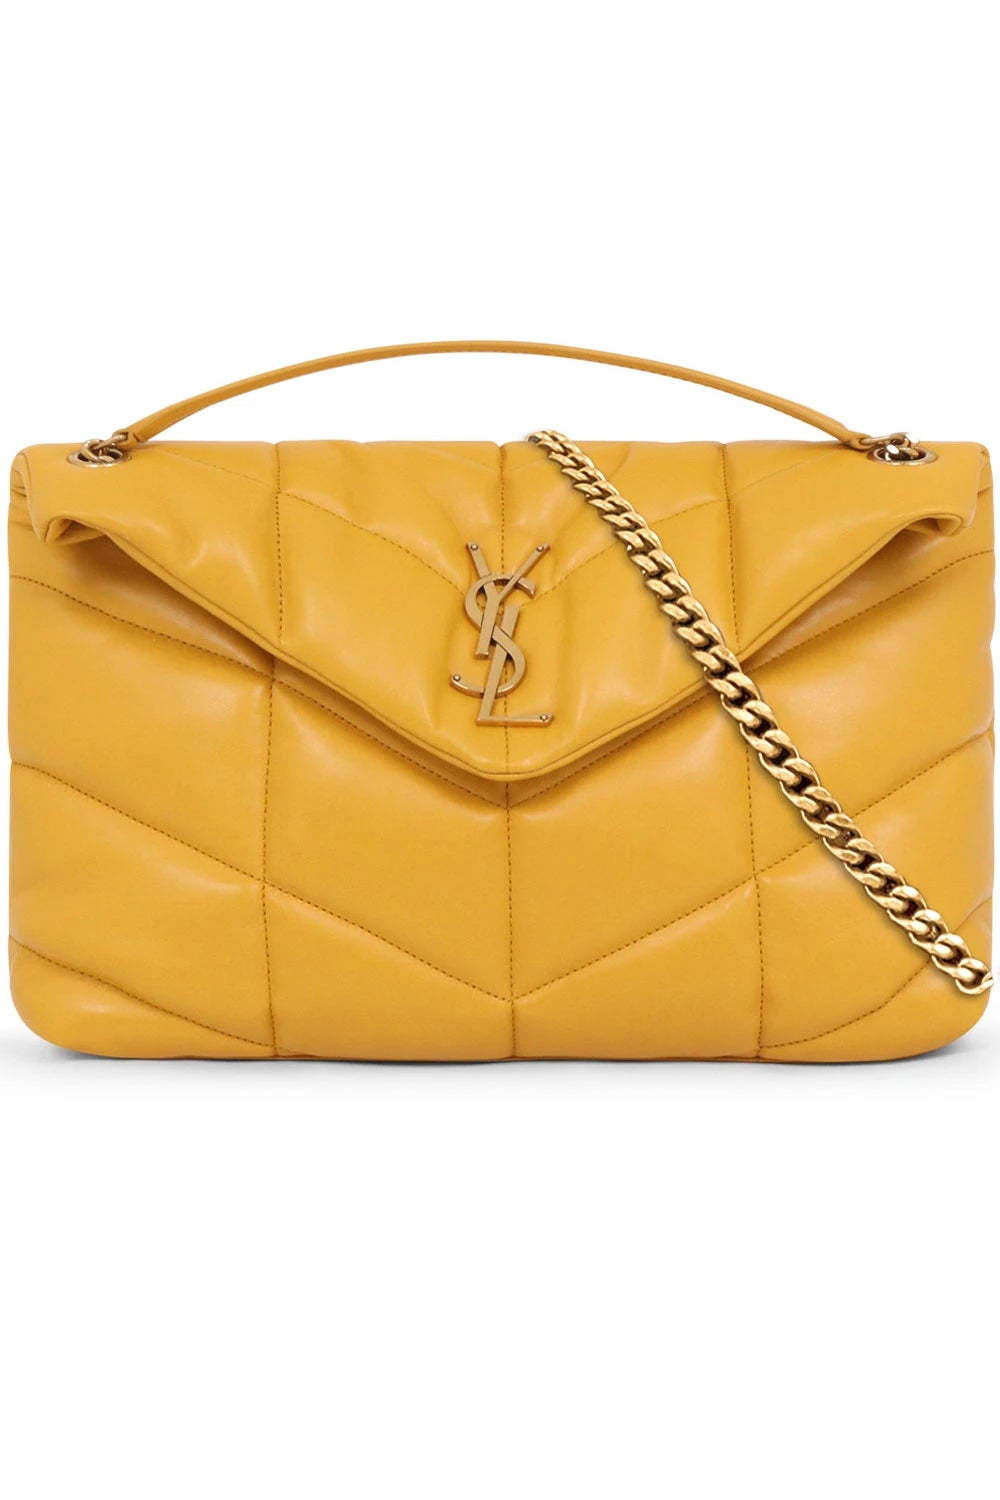 ysl loulou small beige